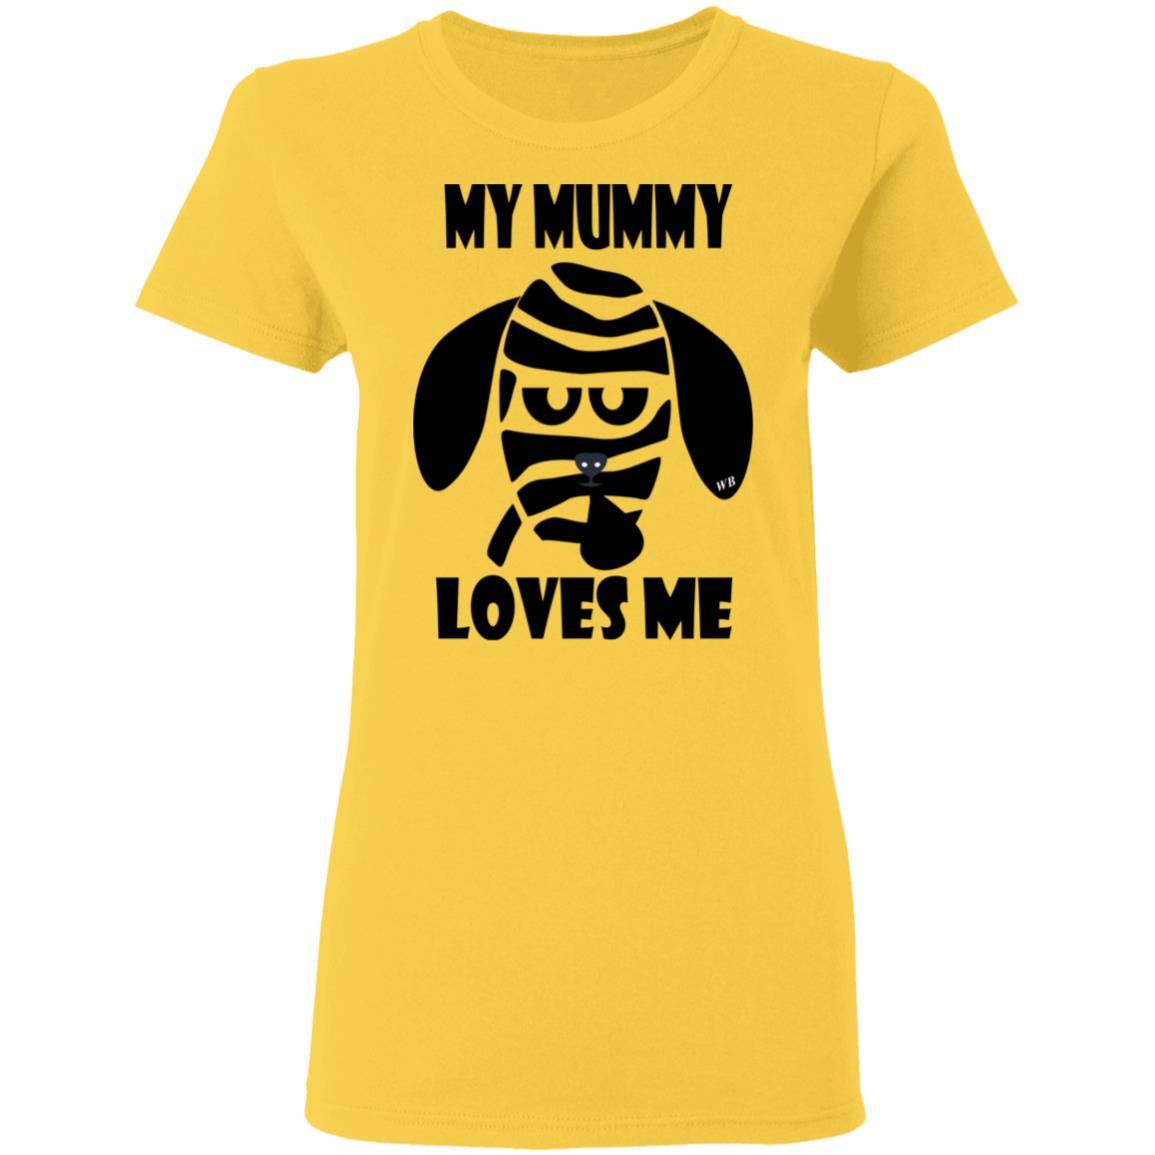 T-Shirts Daisy / S WineyBitches.Co "My Mummy Loves Me" Halloween Collection Ladies' 5.3 oz. T-Shirt WineyBitchesCo